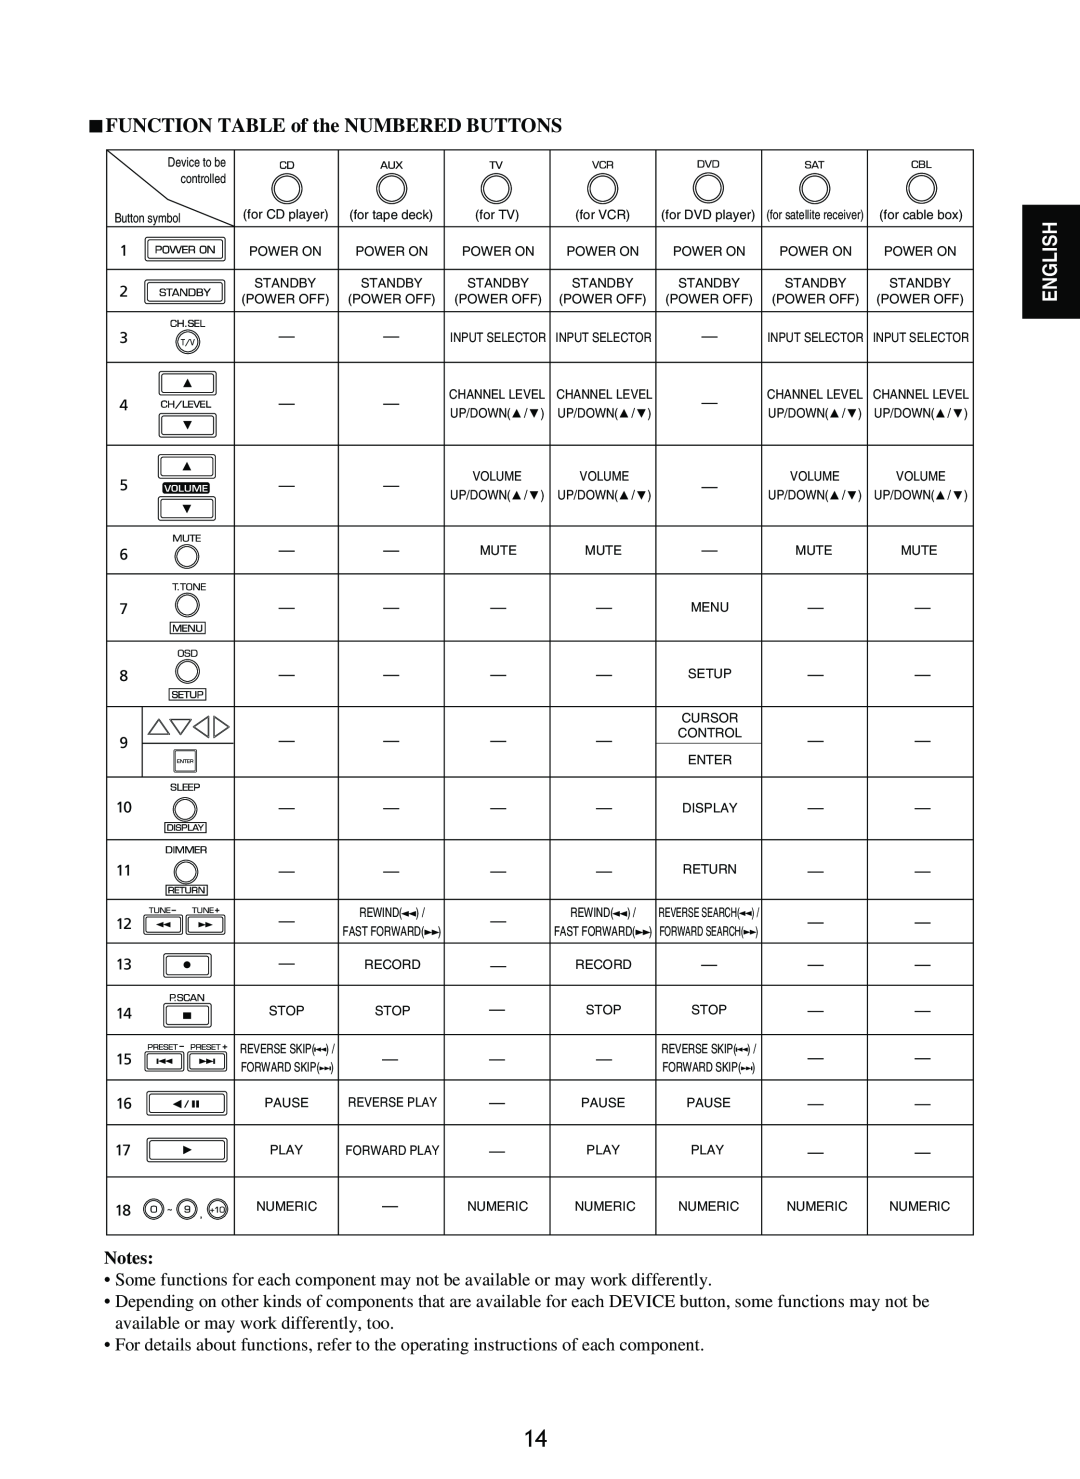 Sherwood RD-8601 operating instructions Notes, FUNCTION TABLE of the NUMBERED BUTTONS, English 